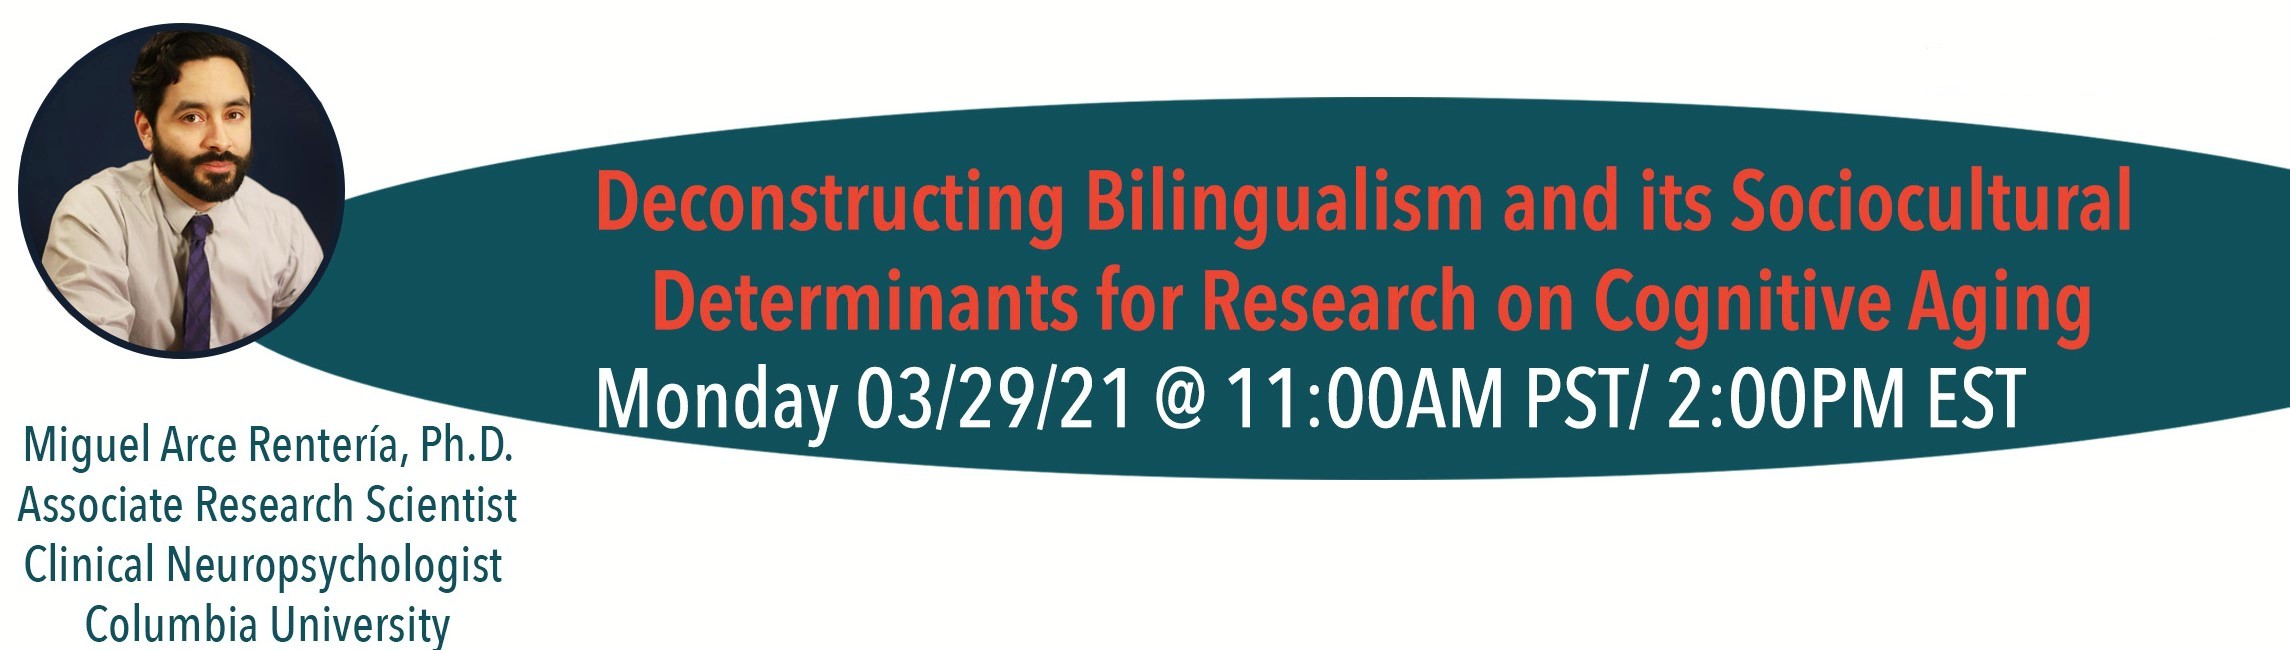 Deconstructing bilingualism and its sociocultural determinants for research on cognitive aging with Dr. Miguel Arce Rentería